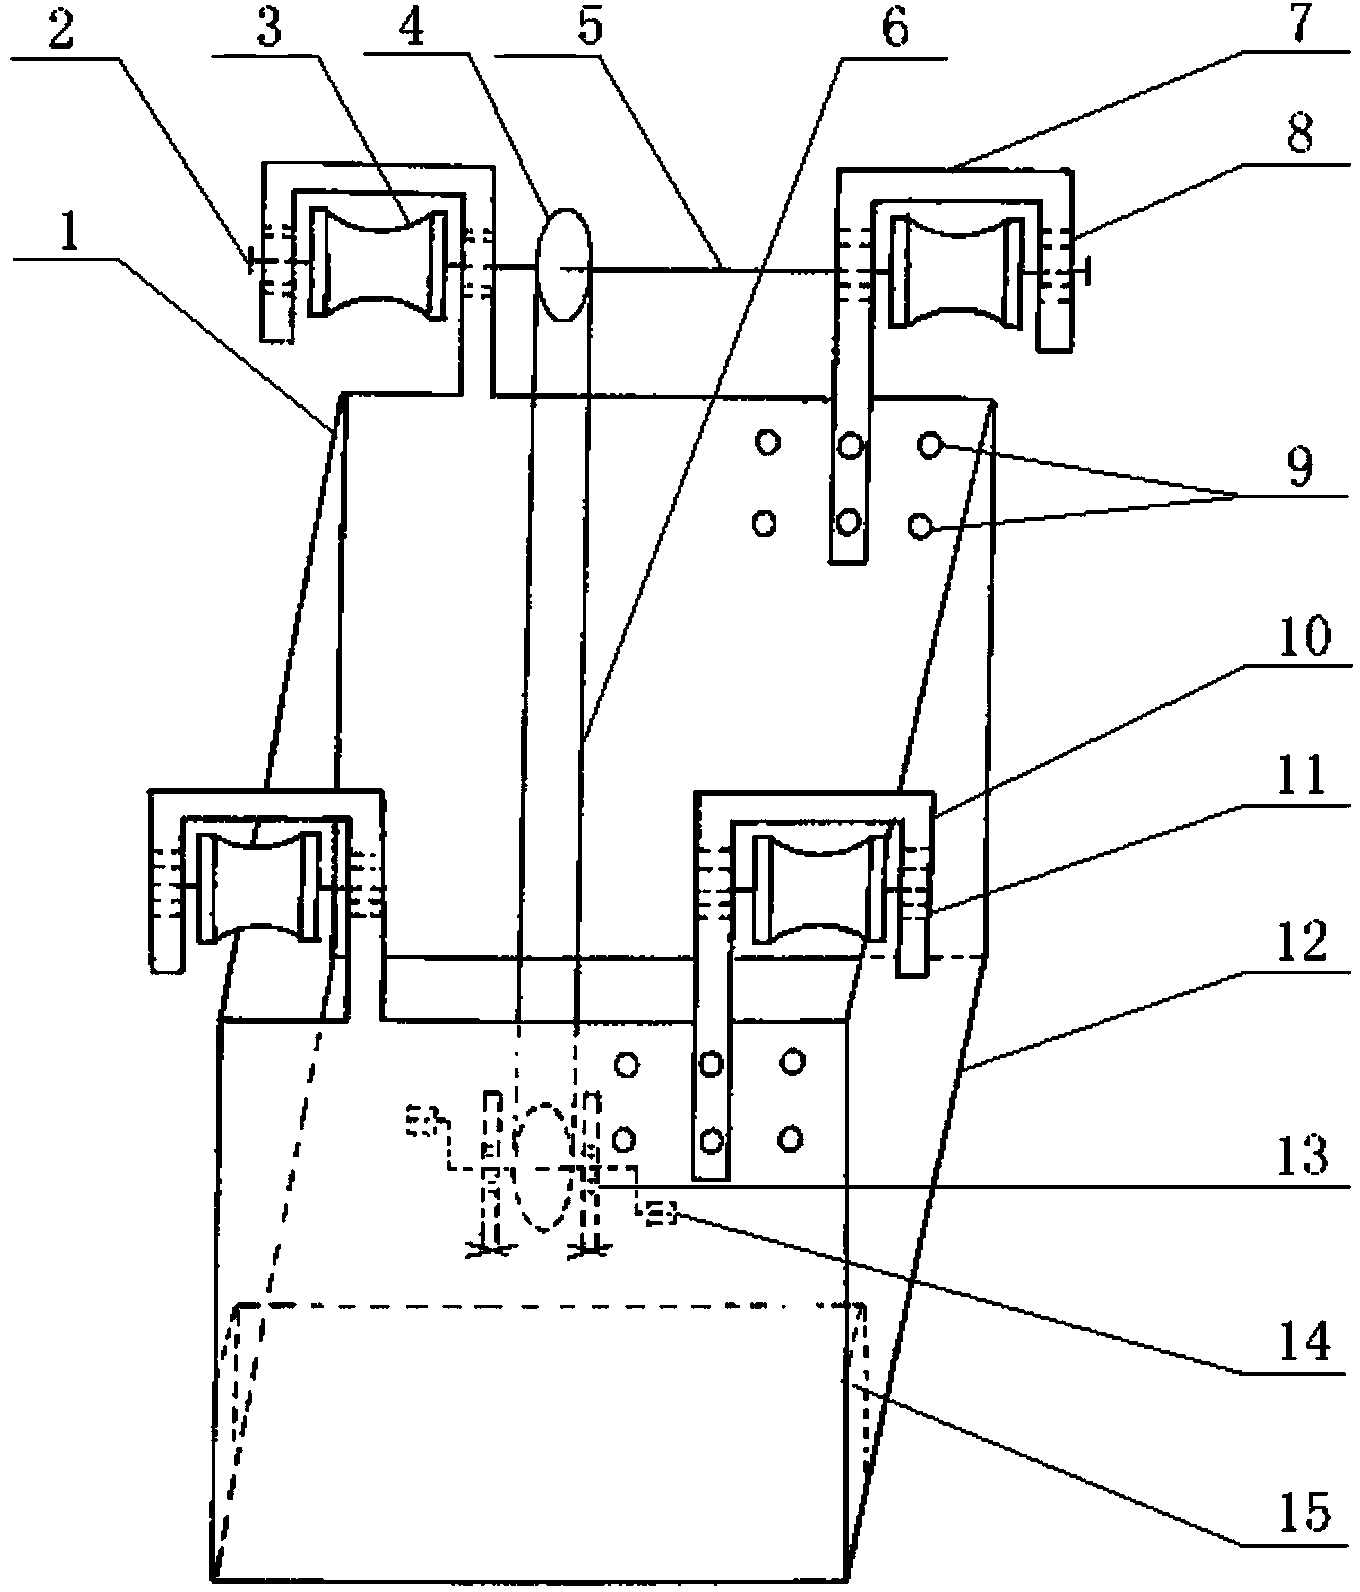 Pedal flying trolley for divided conductor